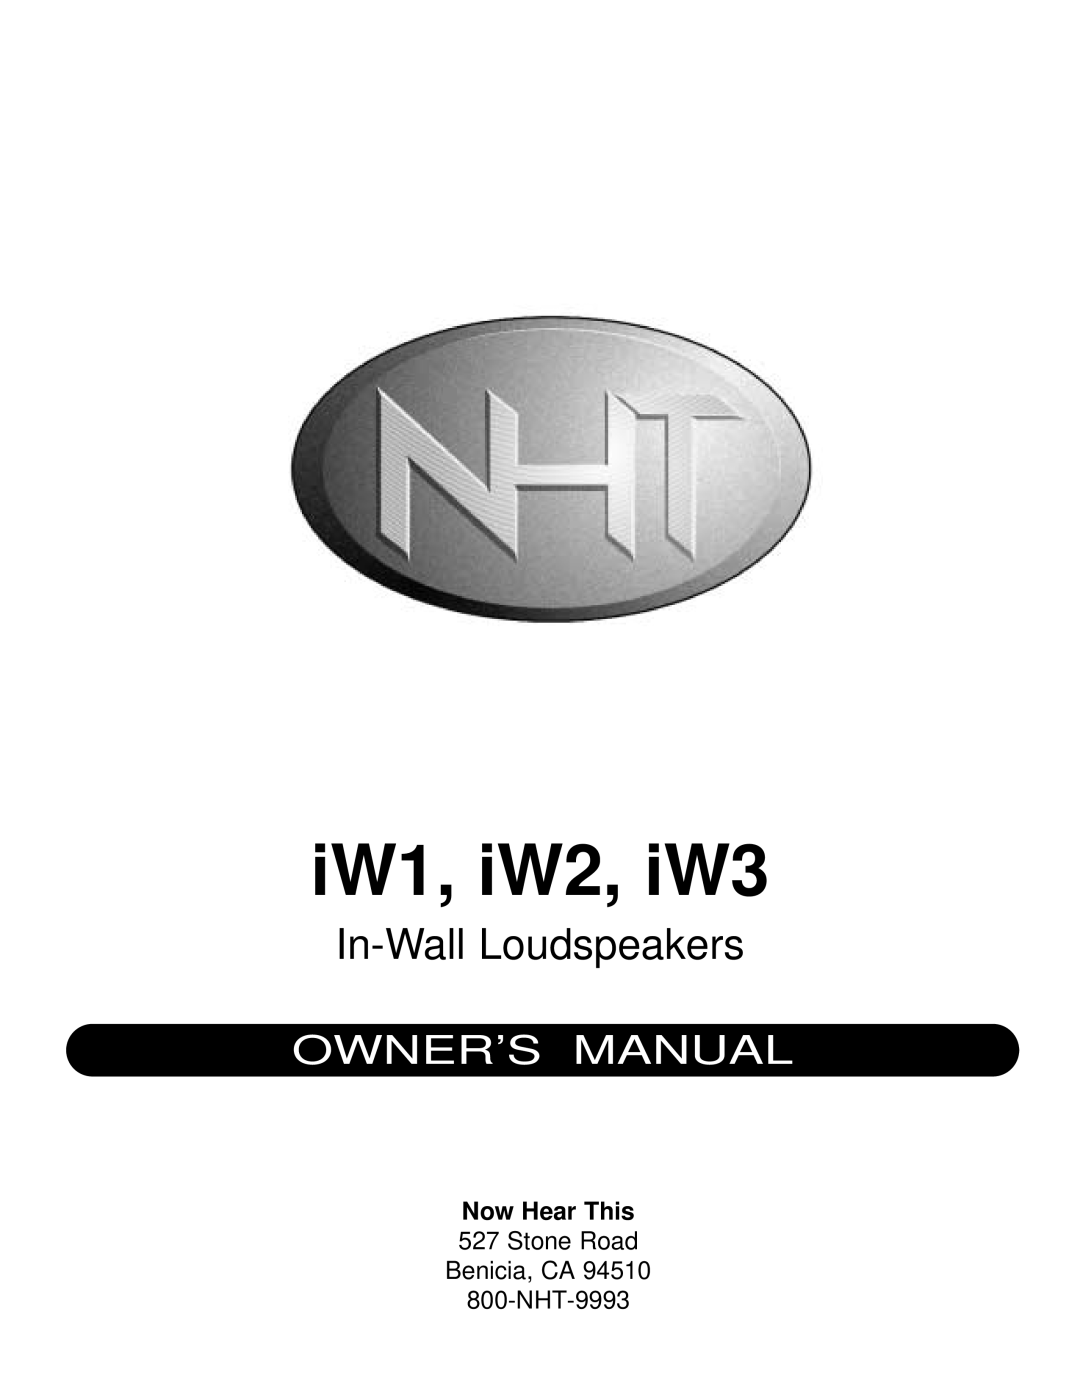 NHT IW1 owner manual Now Hear This, Stone Road Benicia, CA 800-NHT-9993, iW1, iW2, iW3, In-WallLoudspeakers 